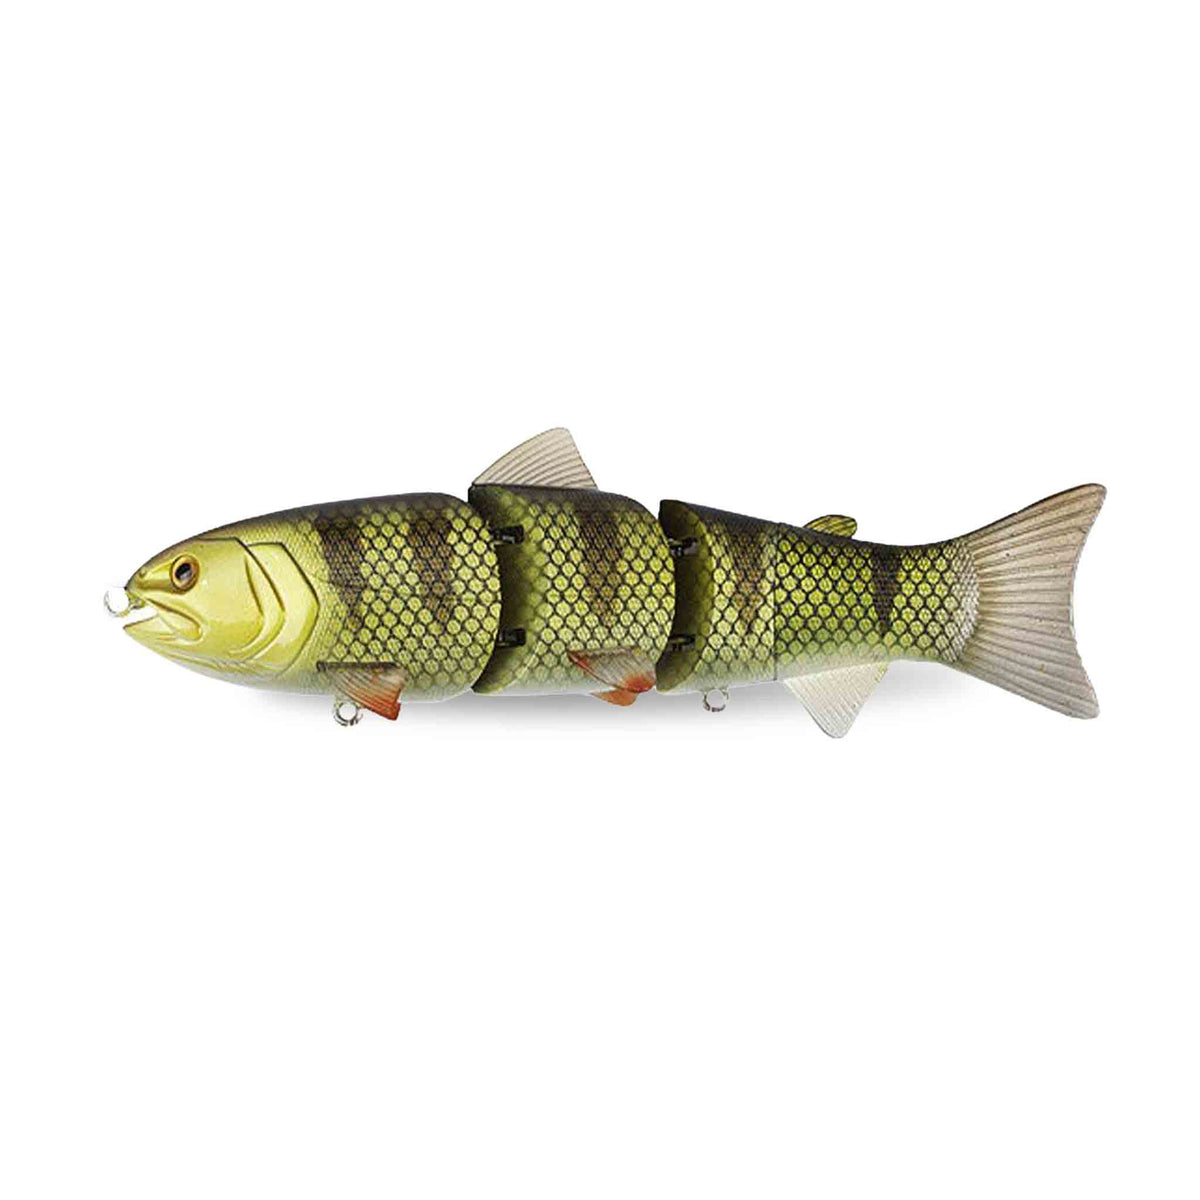 View of Swimbaits SPRO Swimbait 80 Slow Sinking Wicked Perch available at EZOKO Pike and Musky Shop